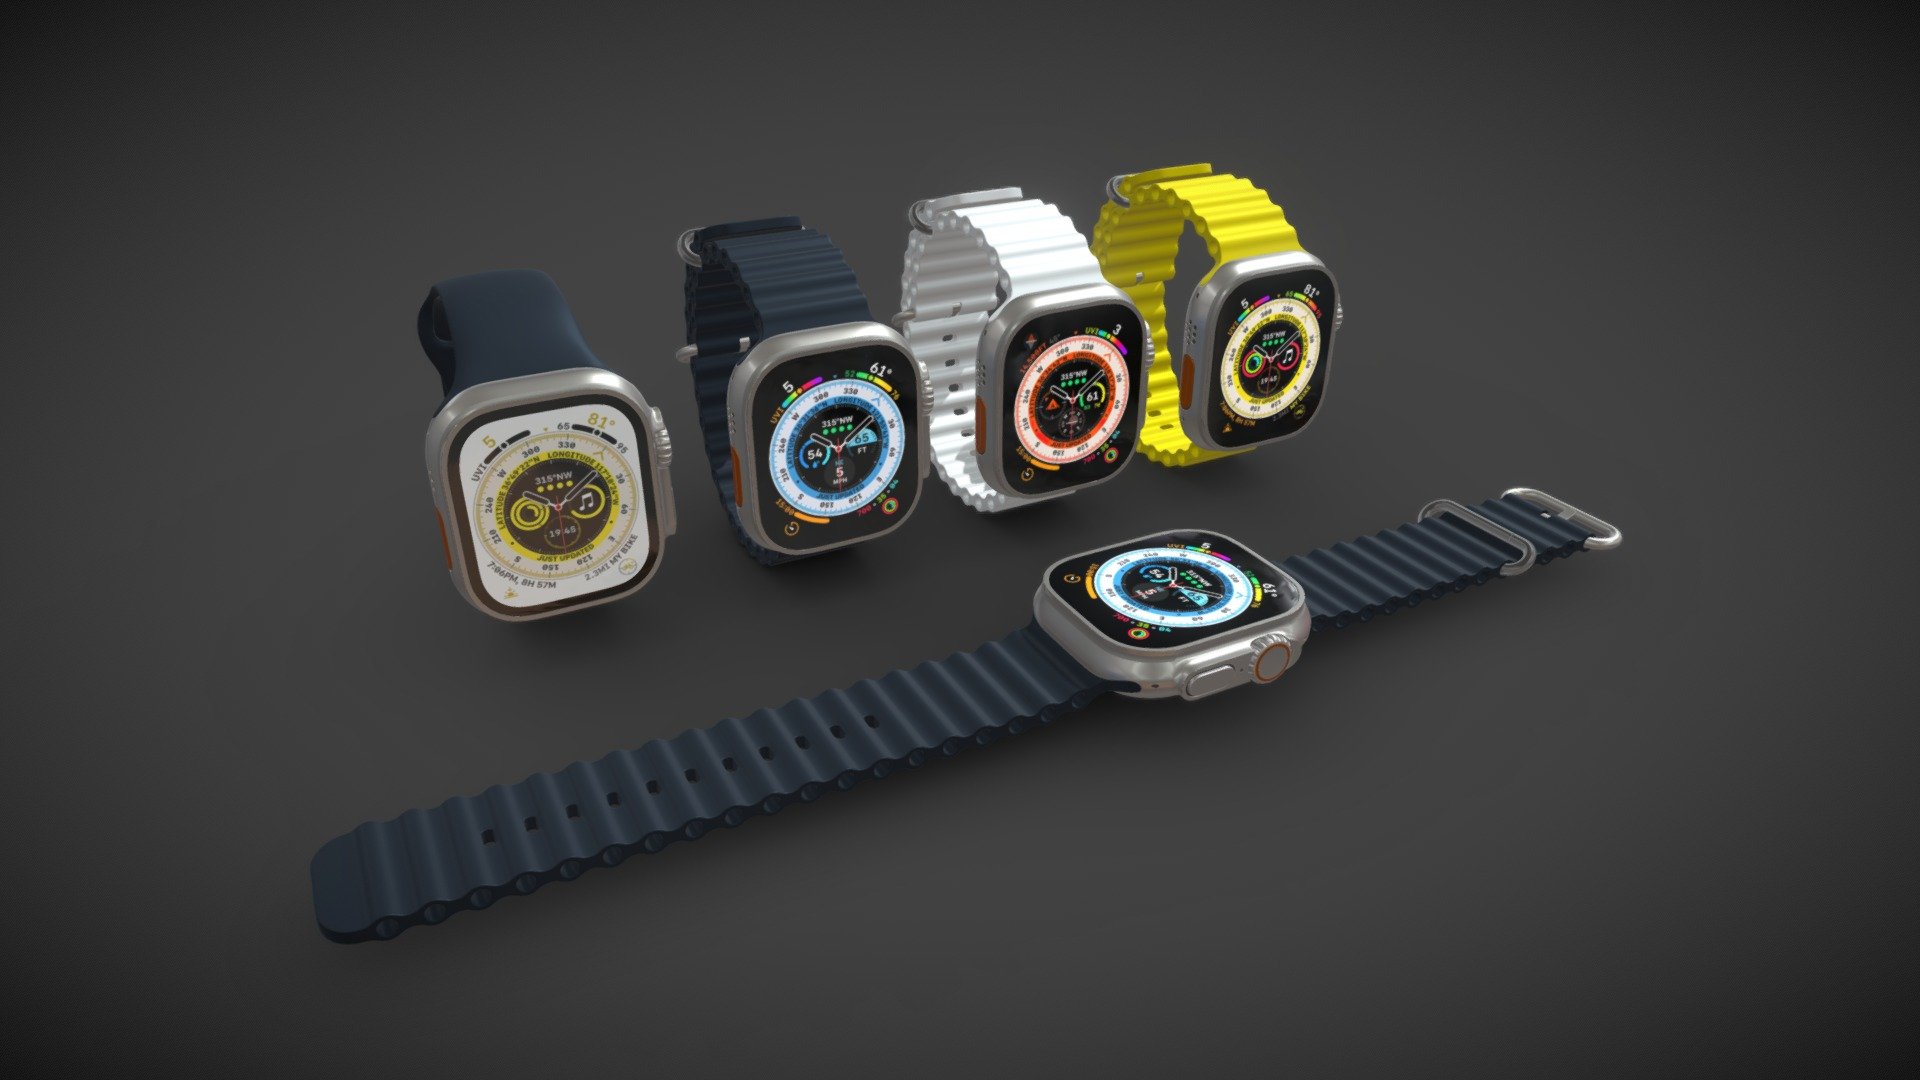 Realistic (copy) 3d model of Apple Watch Ultra all colors.

This set:
- 1 file obj standard
- 1 file 3ds Max 2013 vray material
- 1 file 3ds Max 2013 corona material
- 1 file of 3Ds
- 4 file e3d full set of materials.
- 1 file cinema 4d standard.
- 1 file blender cycles.

Topology of geometry:
- forms and proportions of The 3D model
- the geometry of the model was created very neatly
- there are no many-sided polygons
- detailed enough for close-up renders
- the model optimized for turbosmooth modifier
- Not collapsed the turbosmooth modified
- apply the Smooth modifier with a parameter to get the desired level of detail

Materials and Textures:
- 3ds max files included Vray-Shaders
- 3ds max files included Corona-Shaders
- Blender files included cycles shaders
- Cinema 4d files included Standard-Shaders
- Element 3d files
- all texture paths are cleared

Organization of scene:
- to all objects and materials
- real world size (system units - mm)
- coordinates of location of the model in space (x0, y0, z0) - Apple Watch Ultra all colors - Buy Royalty Free 3D model by madMIX 3d model